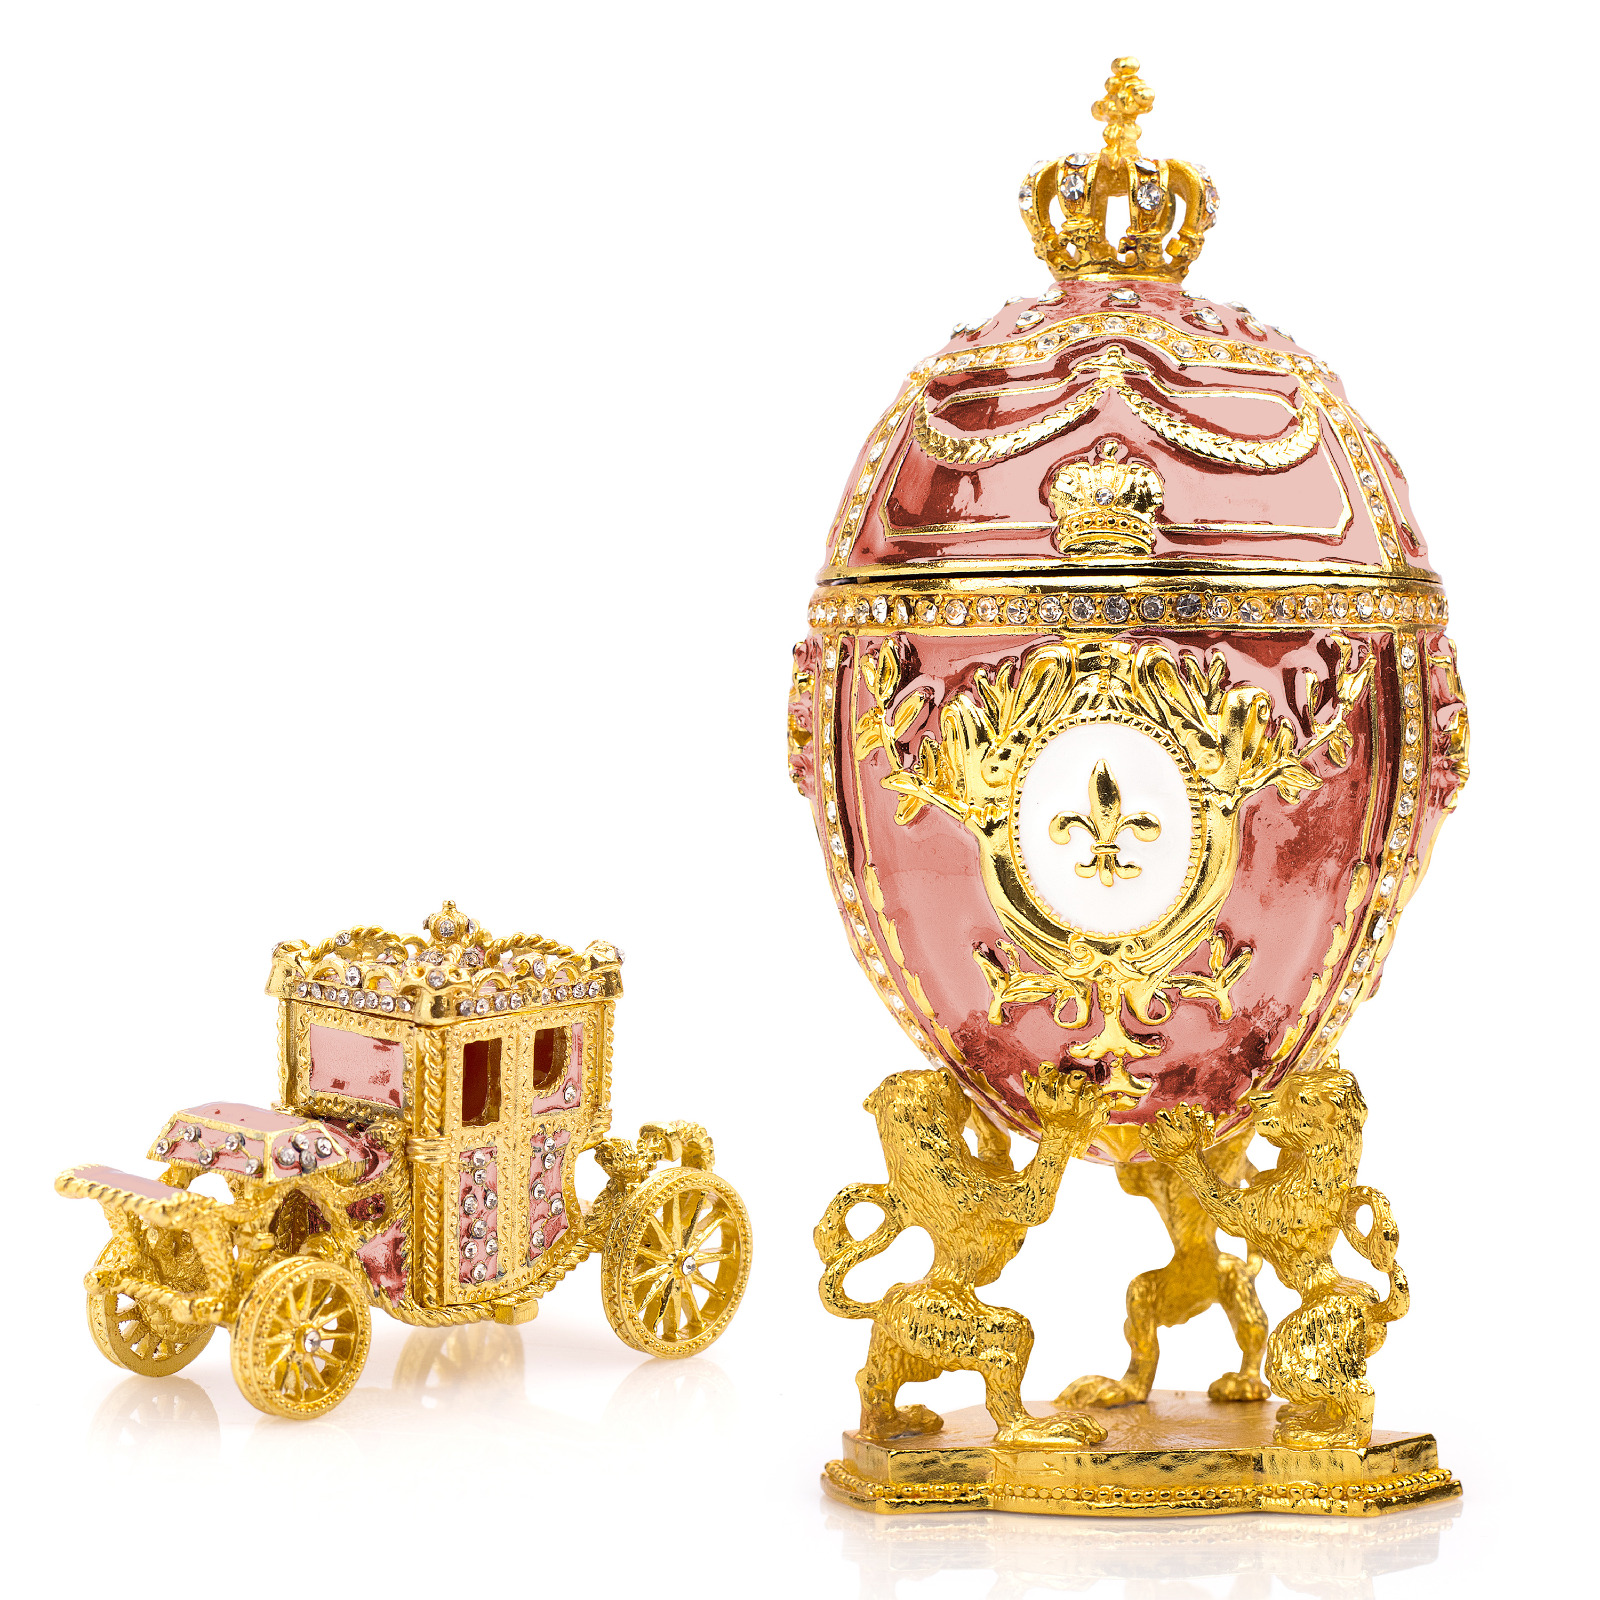 Royal Imperial Pink Faberge Egg Replica: Extra Large 6.6 inch + Carriage by Vtry